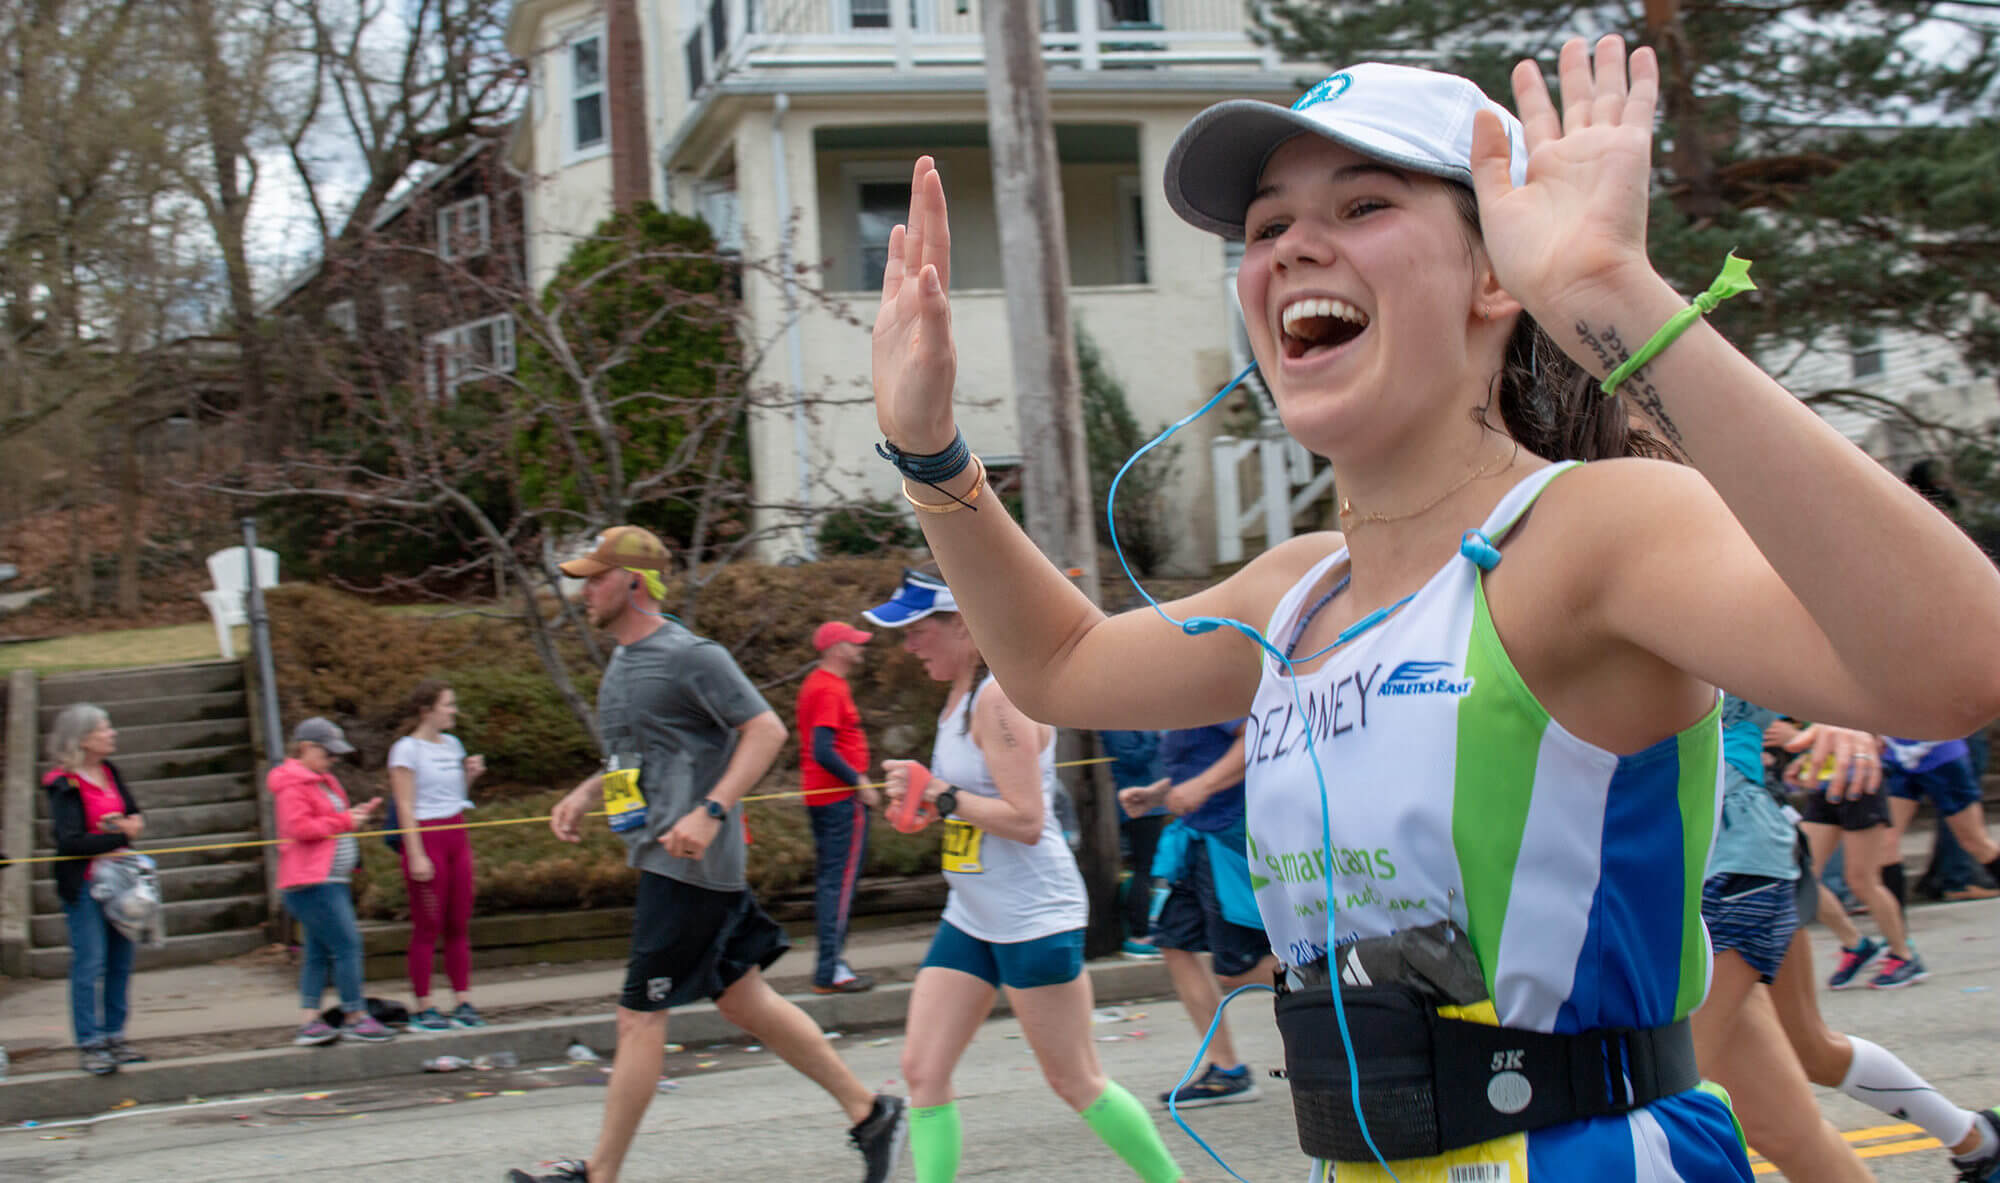 A person smiling with her hands up while running in a race.